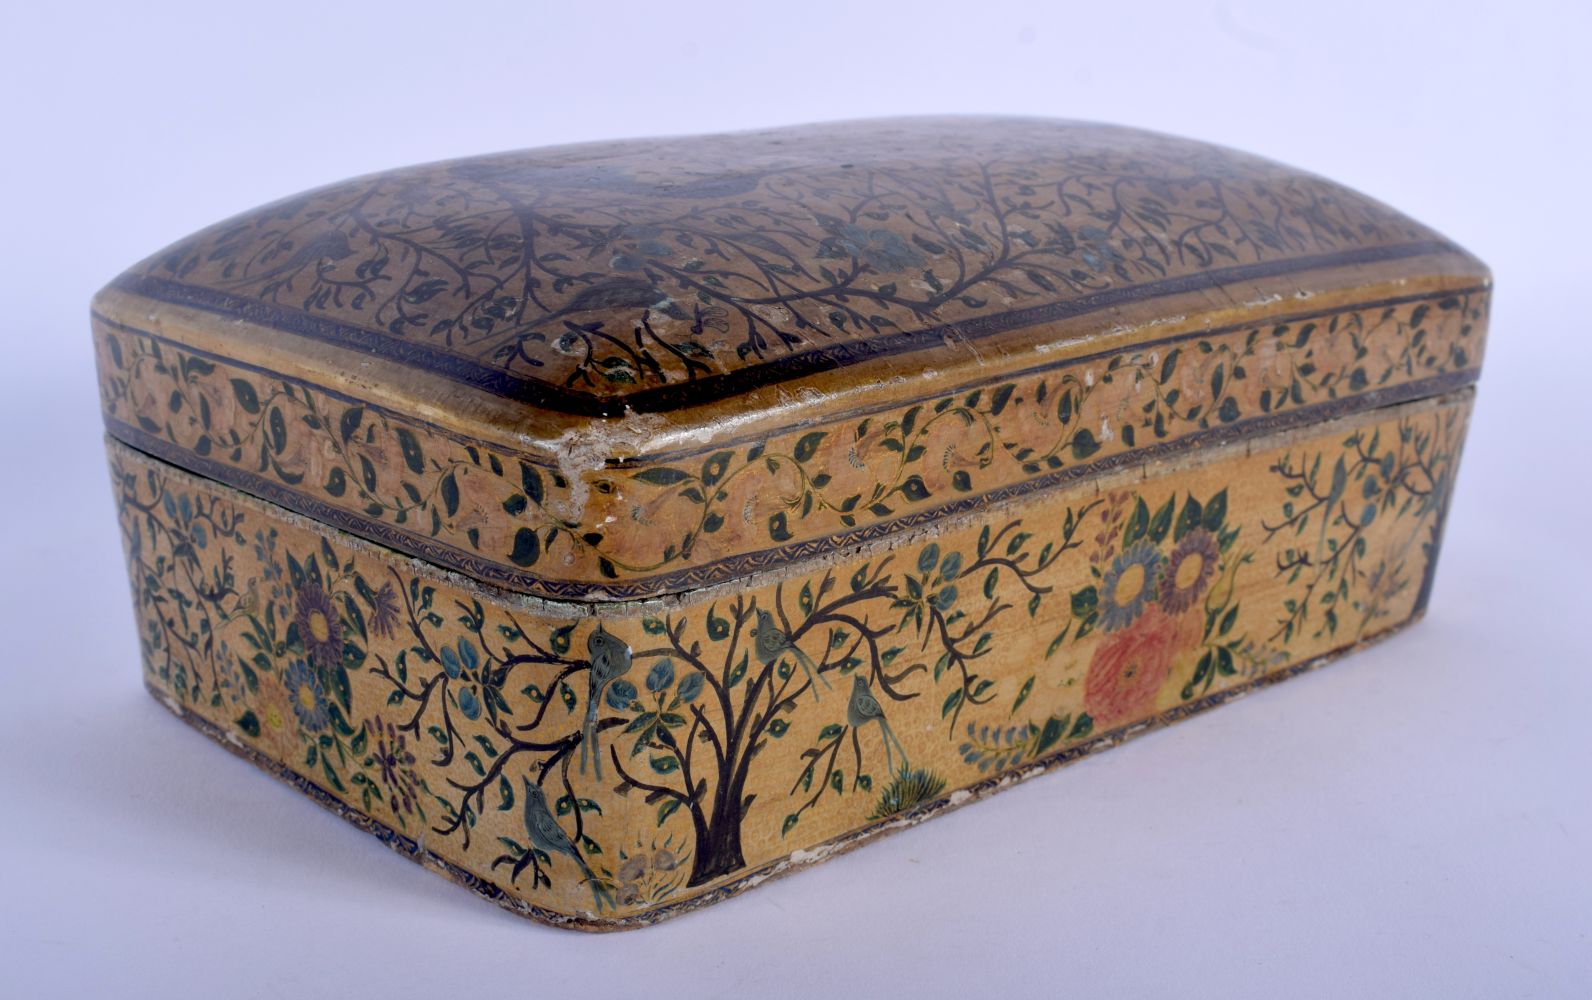 A LARGE EARLY 20TH CENTURY INDIAN PAINTED KASHMIR LACQUER BOX AND COVER painted with birds. 23 cm x - Image 2 of 5